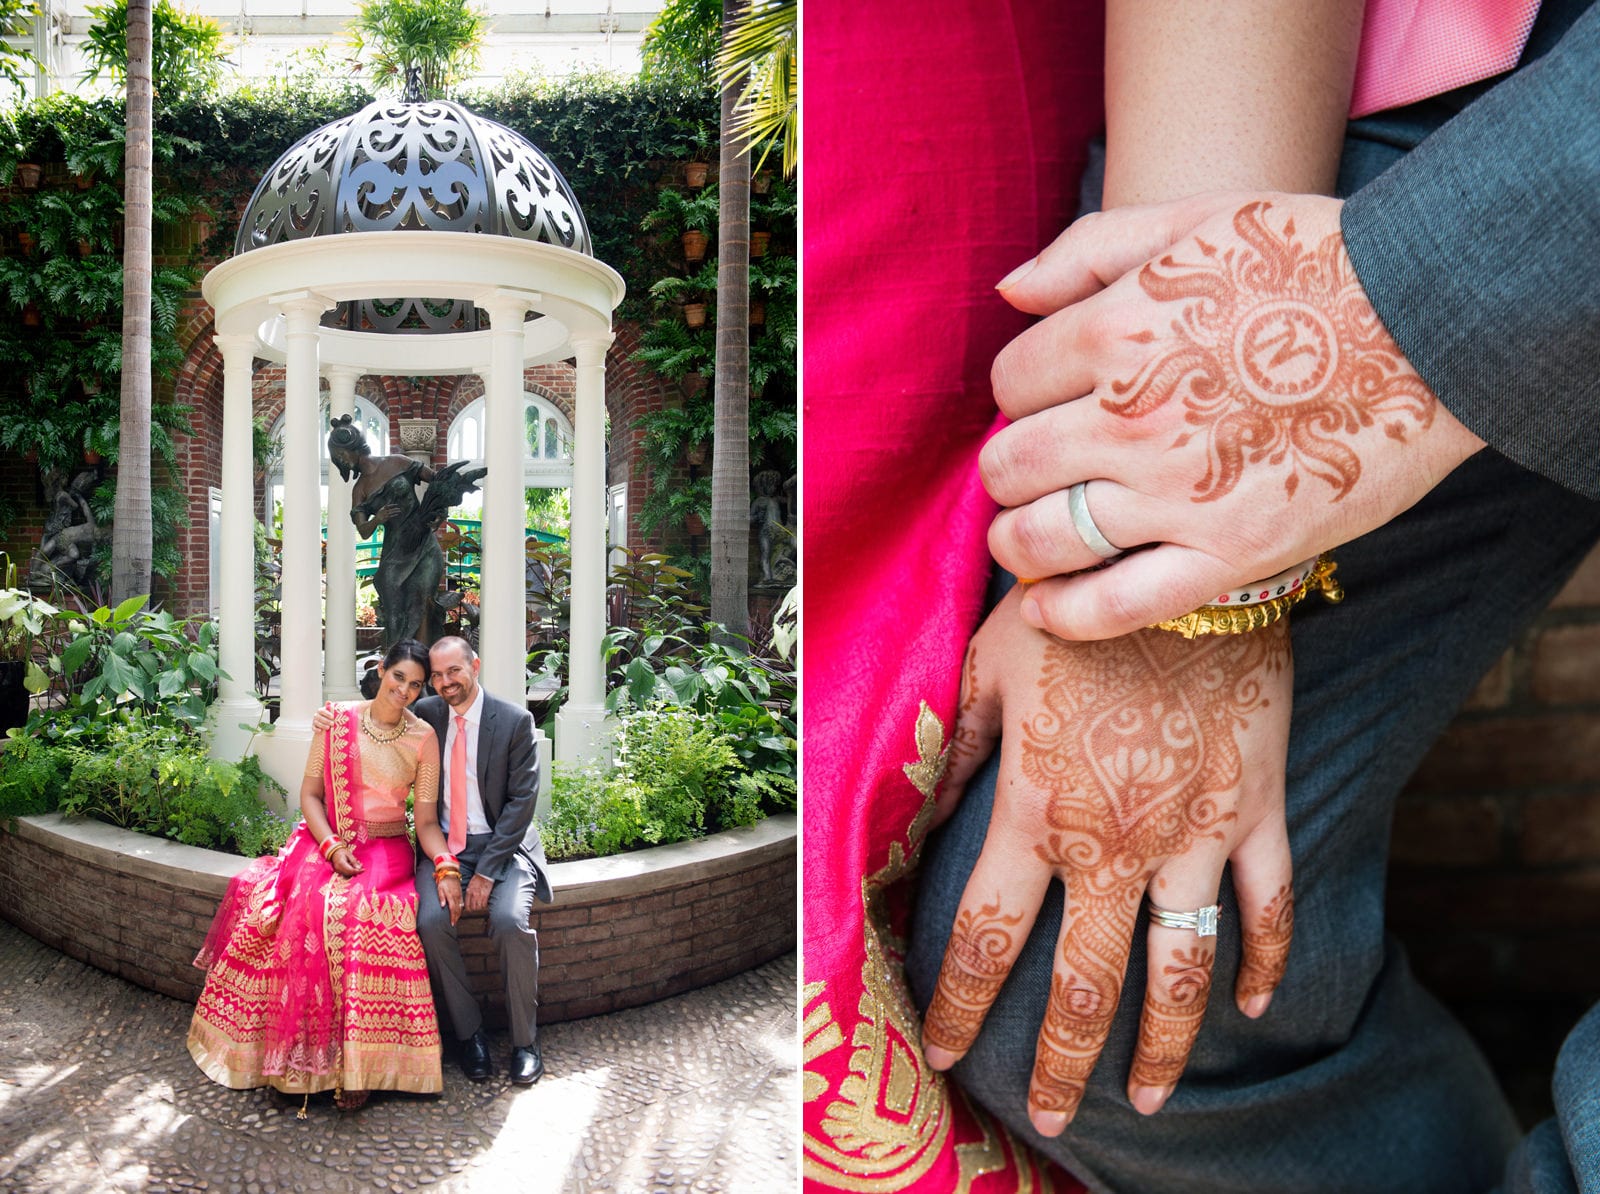 Detail photo of a bride and groom's hands with henna tattoos and a portrait of a bride and groom sitting in front of a statue after their Renaissance Phipps South Asian Wedding.